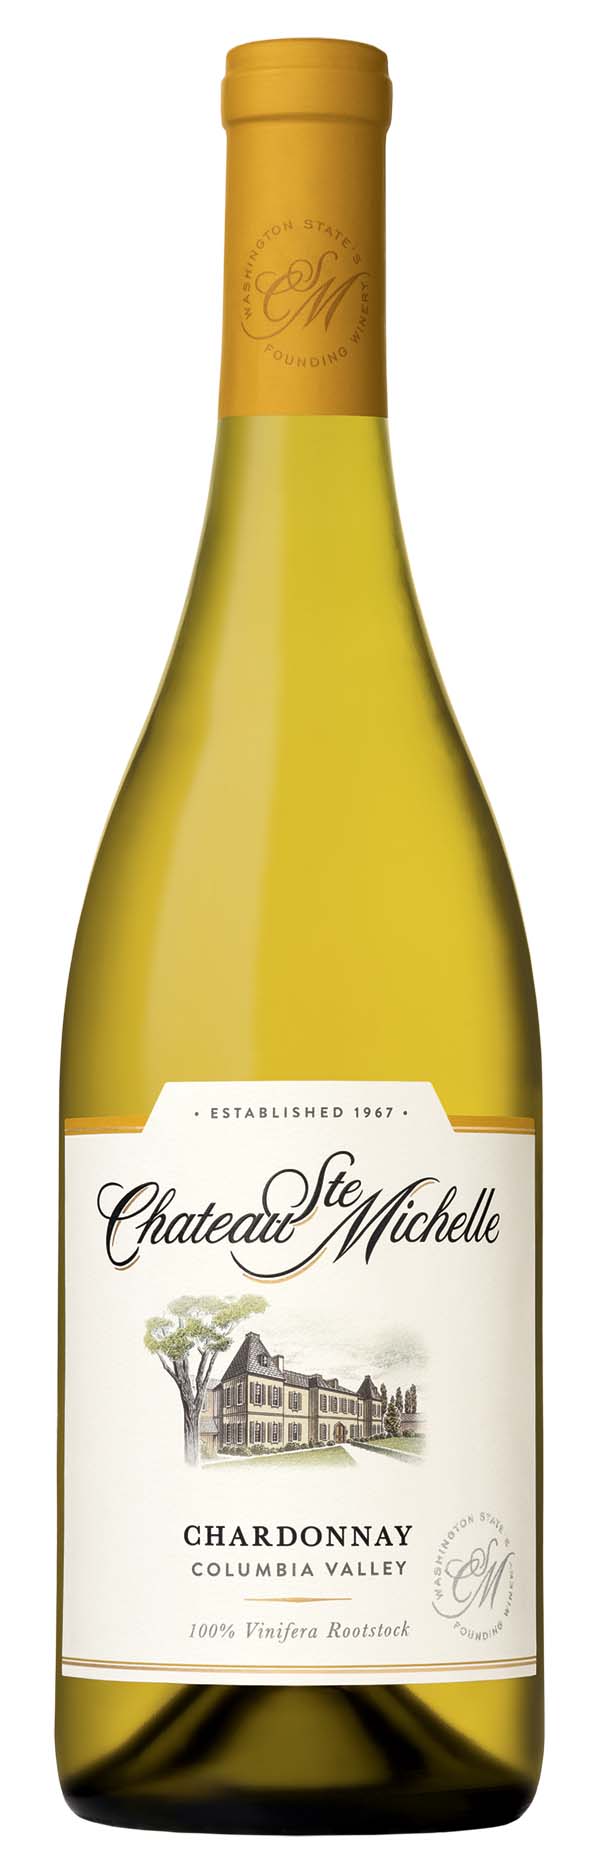 Chateau Ste. Michelle Chardonnay, Columbia Valley